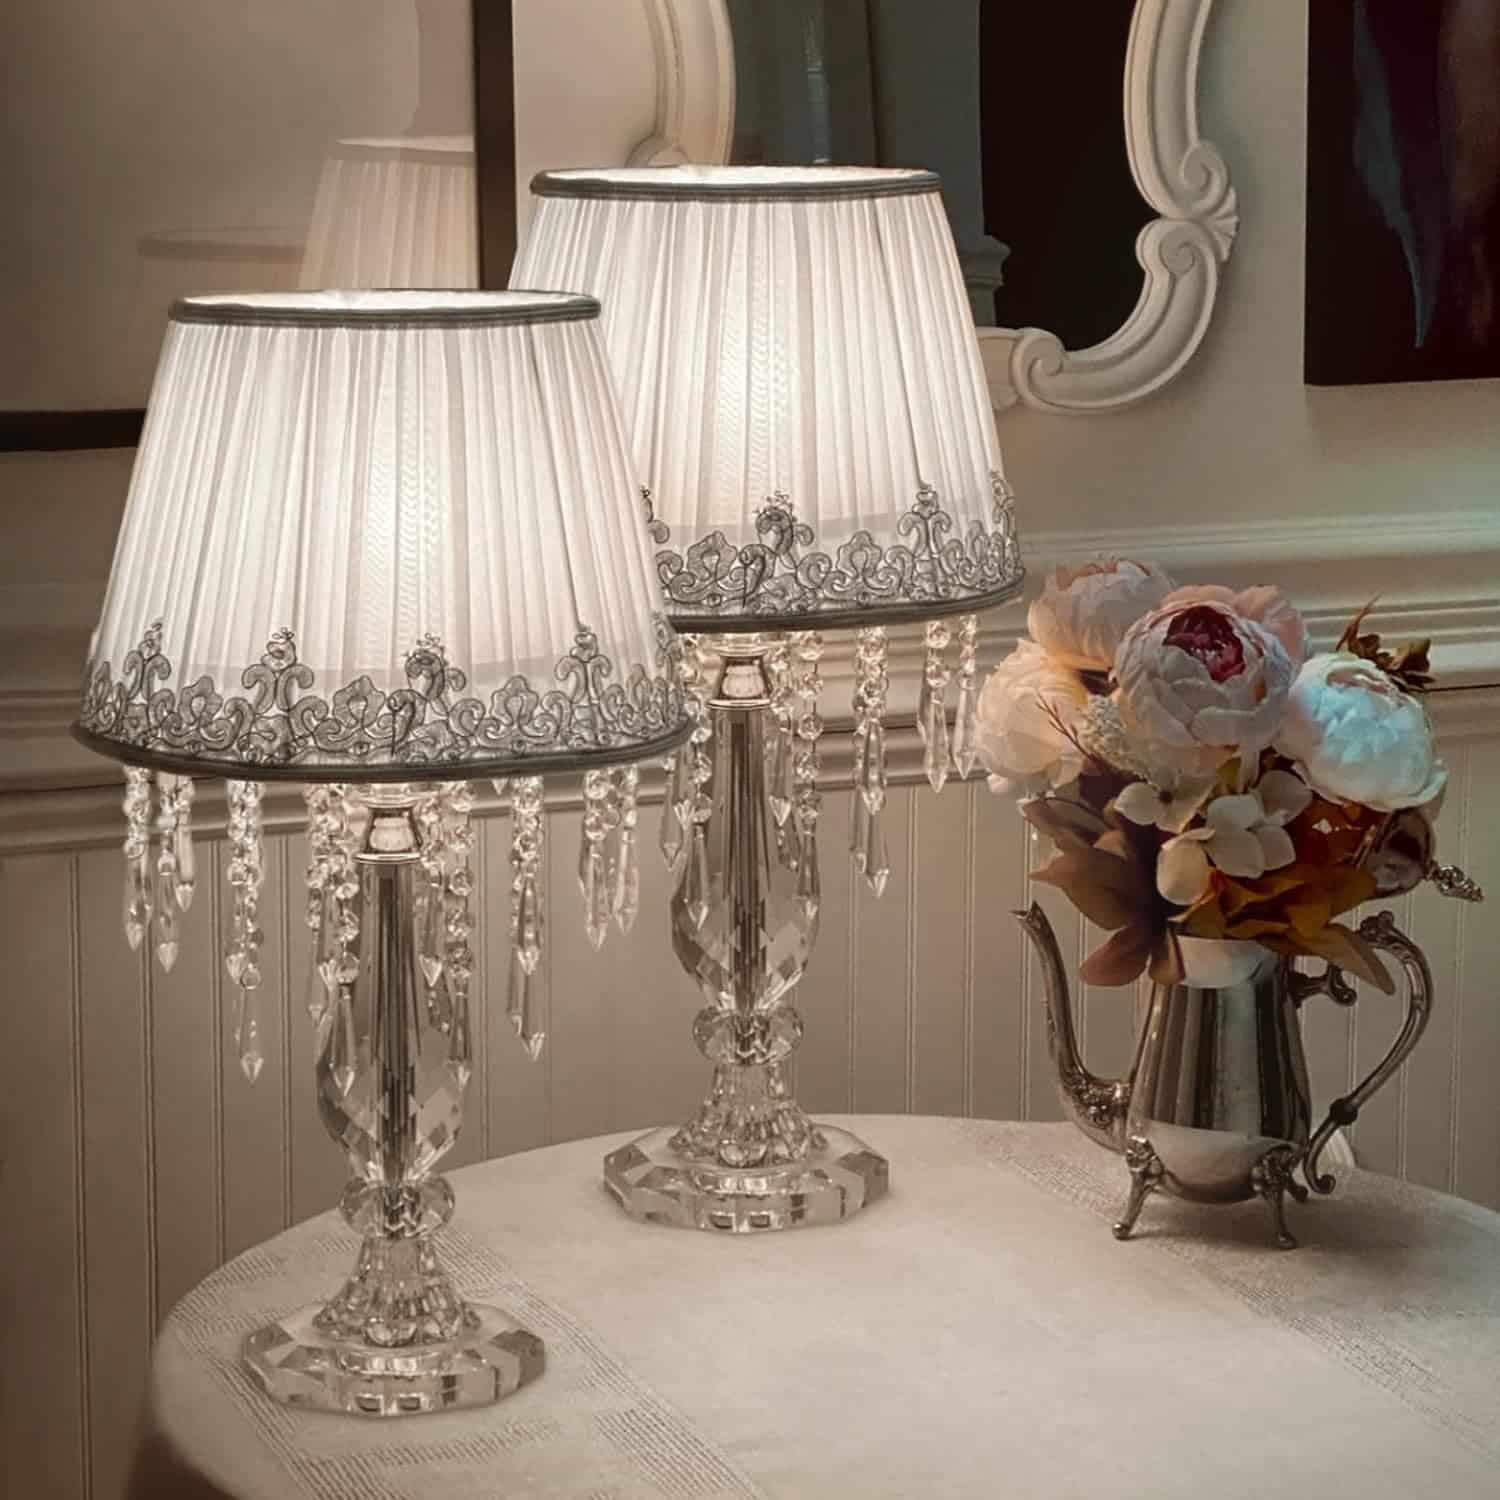 Moooni Modern Bedside Crystal Table Lamp with Ruched Fabric Lampshade Elegant Plug-in Crystal Chandelier Nightstand Lamp for Living Room Girls Room Set of 2 Dimmable W 12.8 X H 22.8